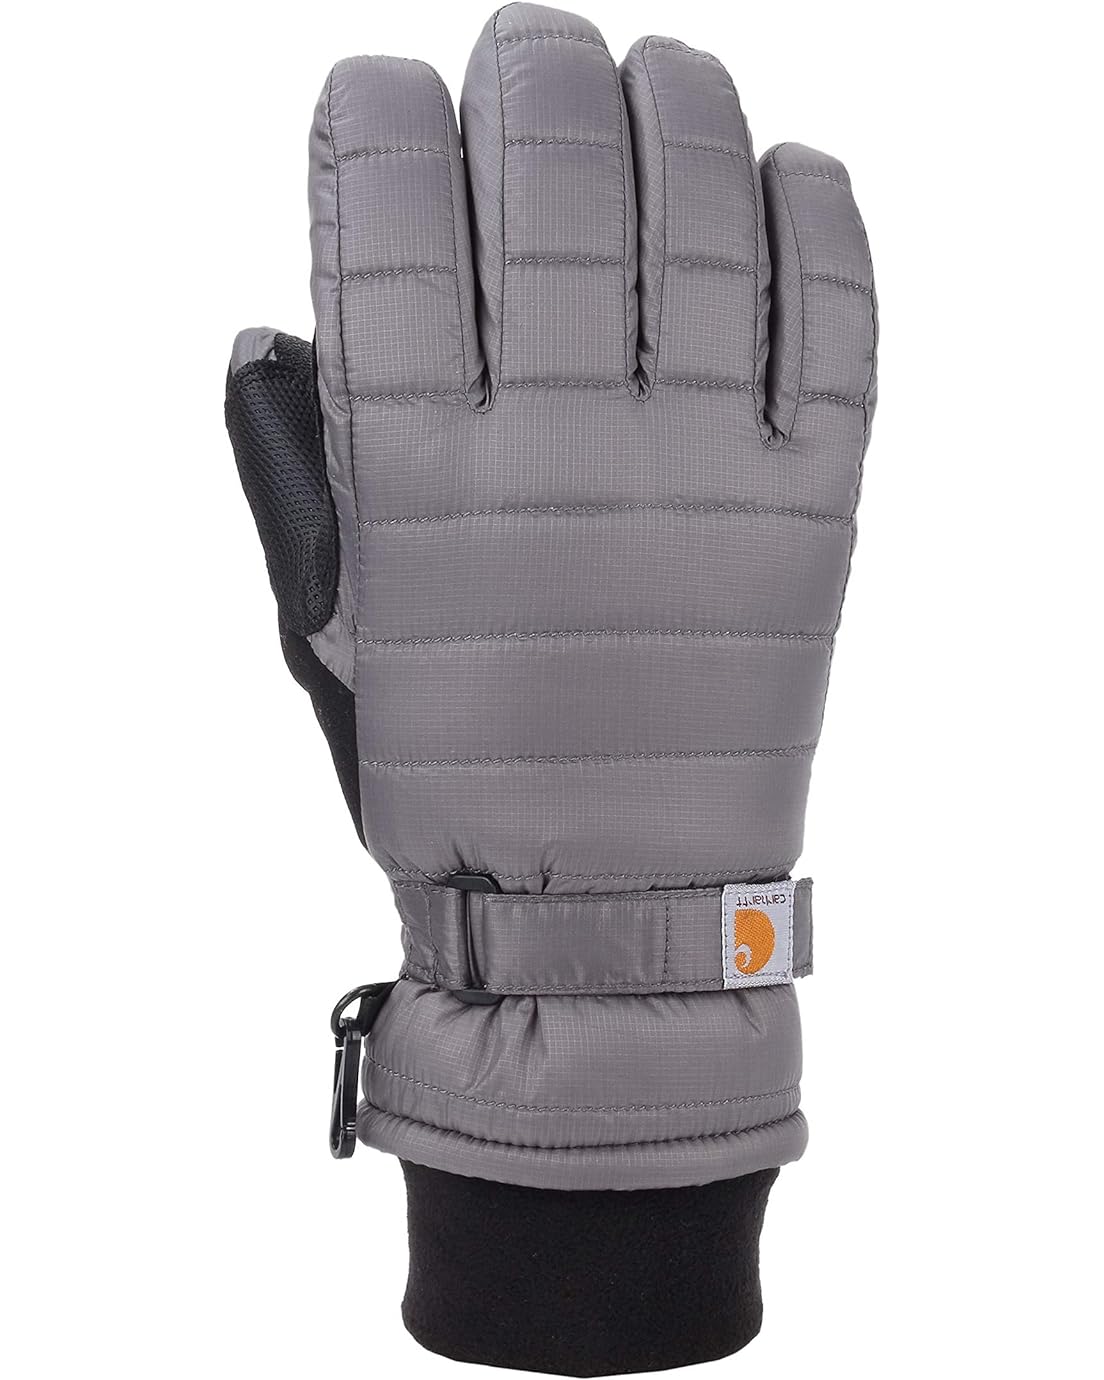 Carhartt Womens Quilts Insulated Breathable Glove with Waterproof Wicking Insert